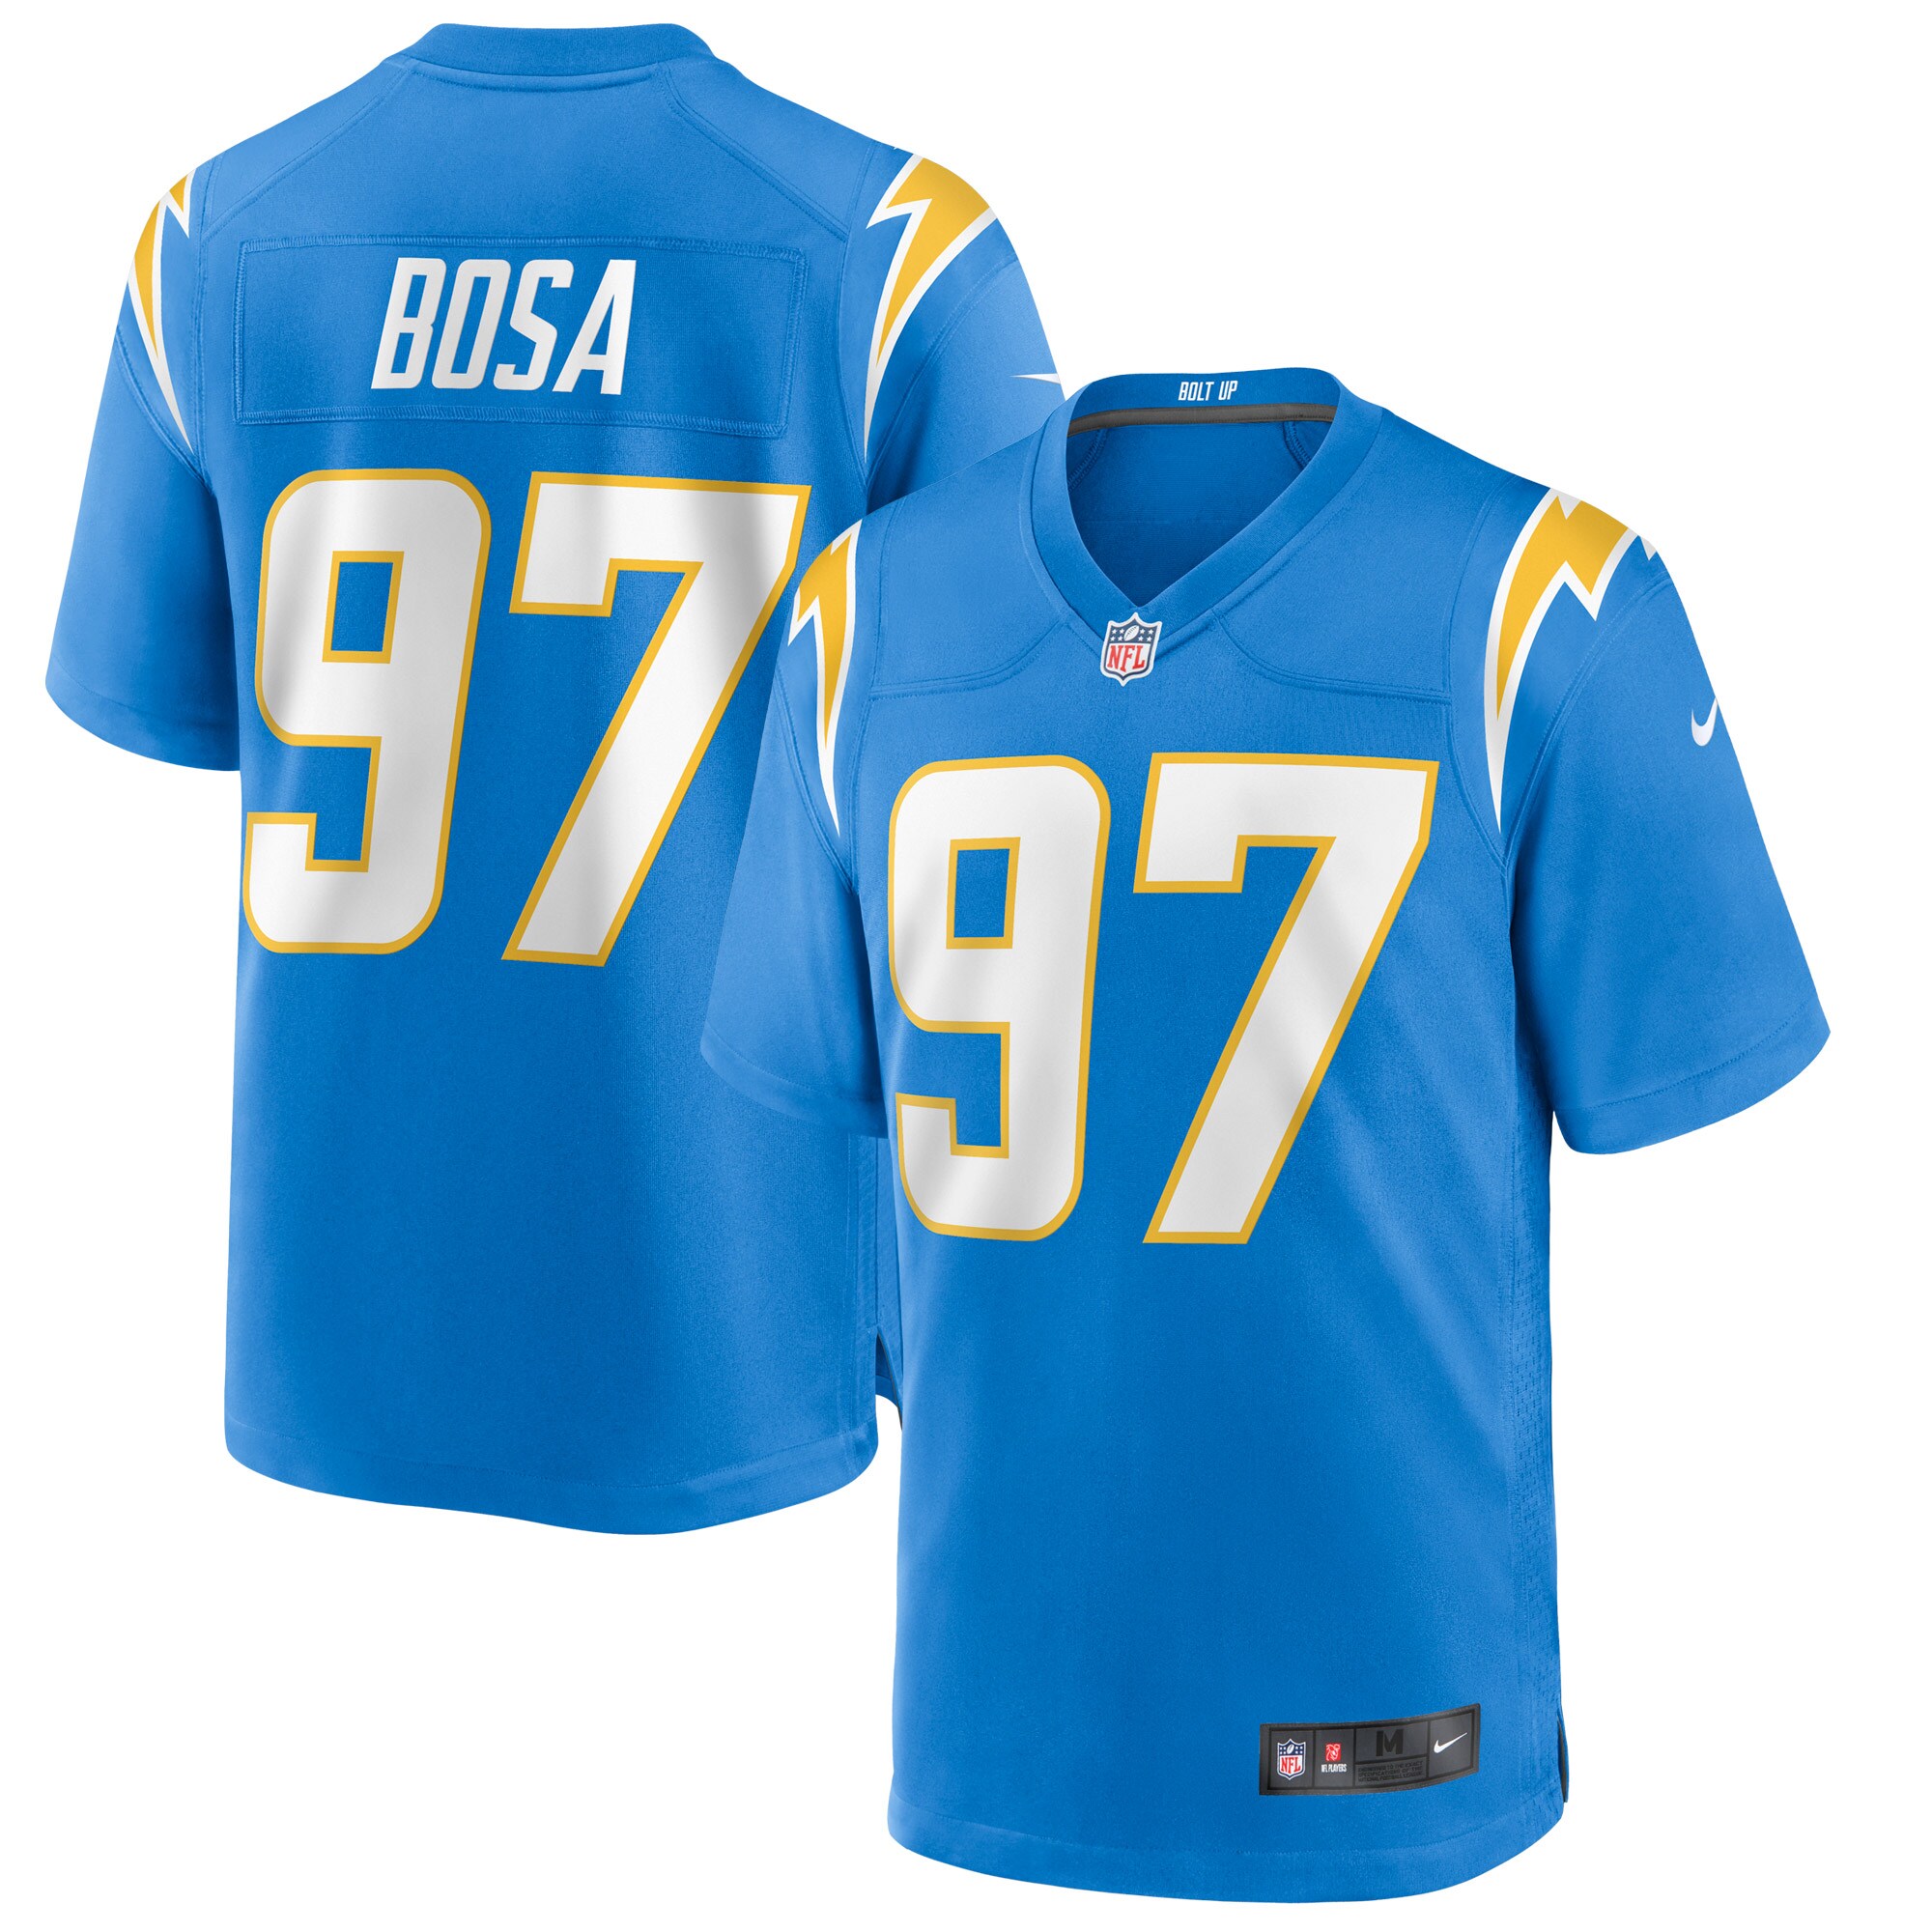 Men's Los Angeles Chargers Rashawn Slater Nike White Game Jersey